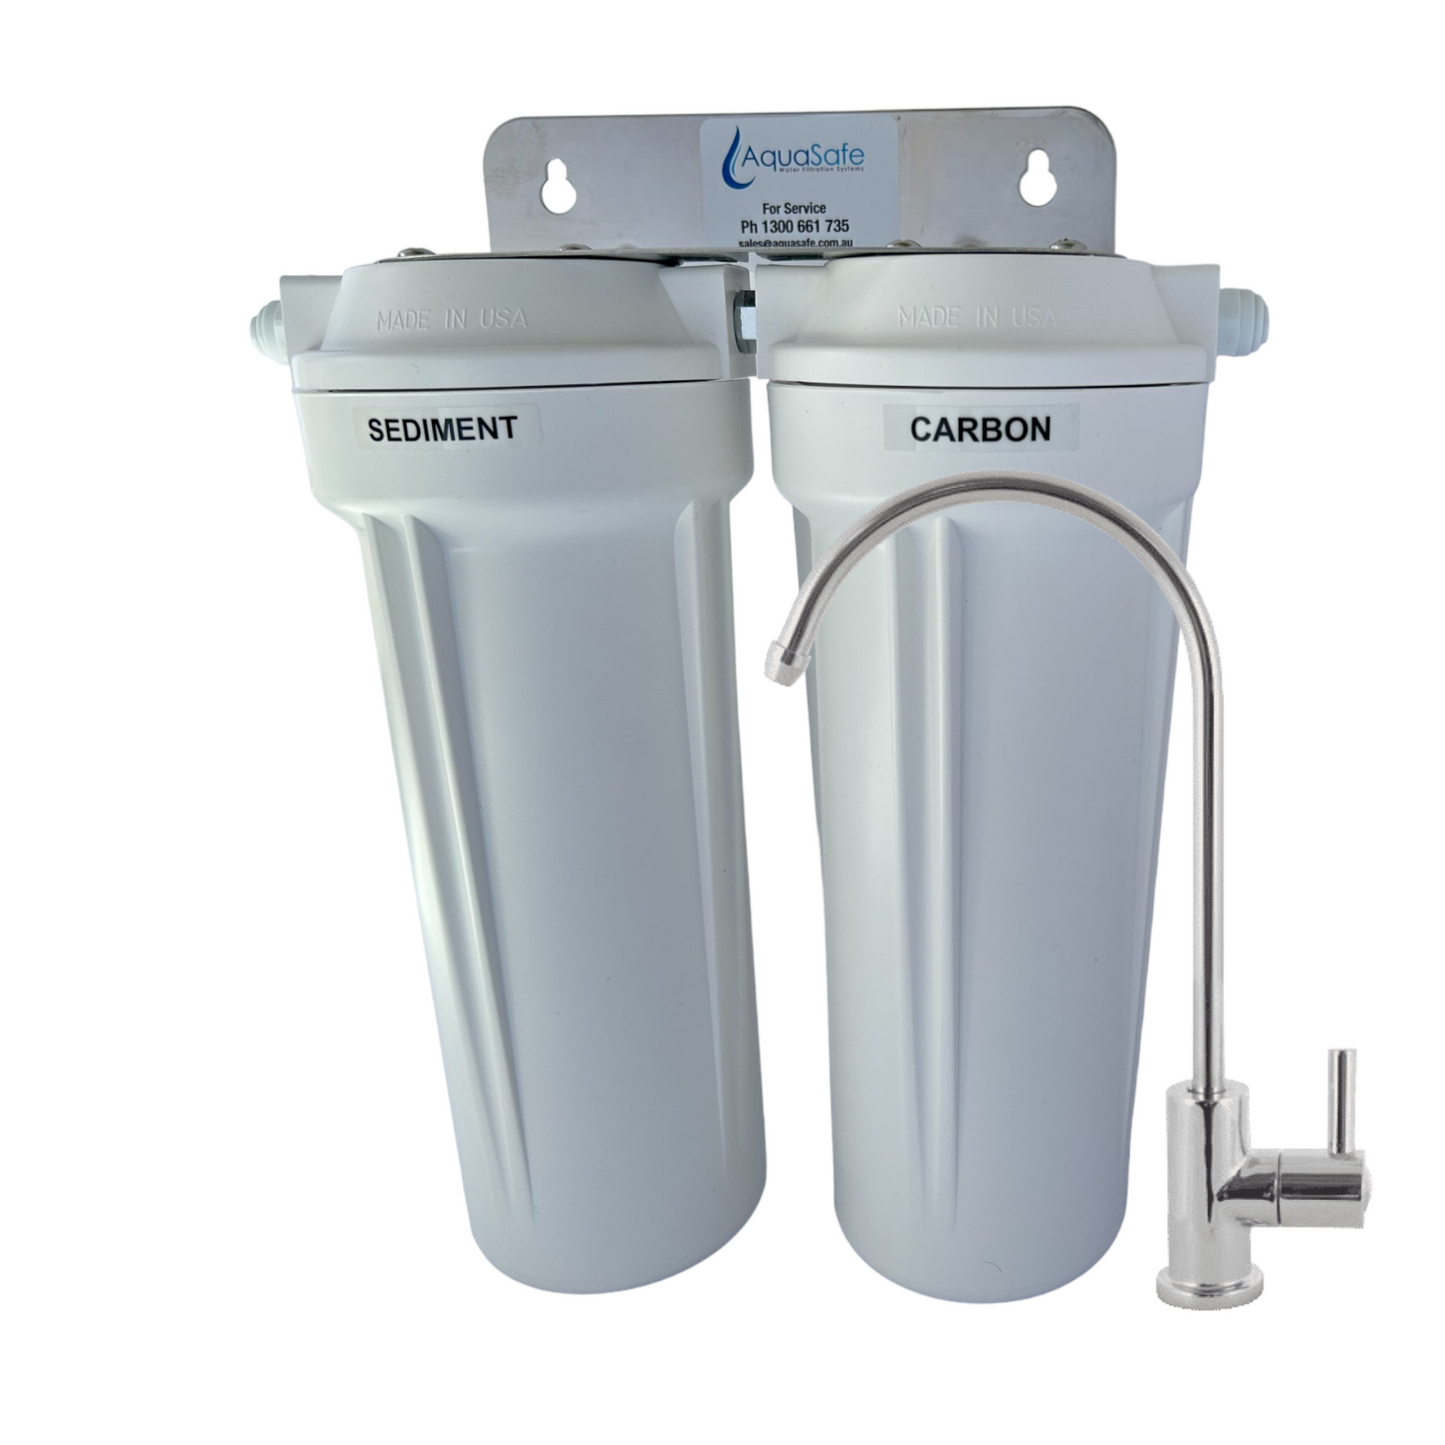 AquaSafe AS200 Twin Under Bench Water Filter System - Chlorine & Chemical/Heavy Metal Reduction